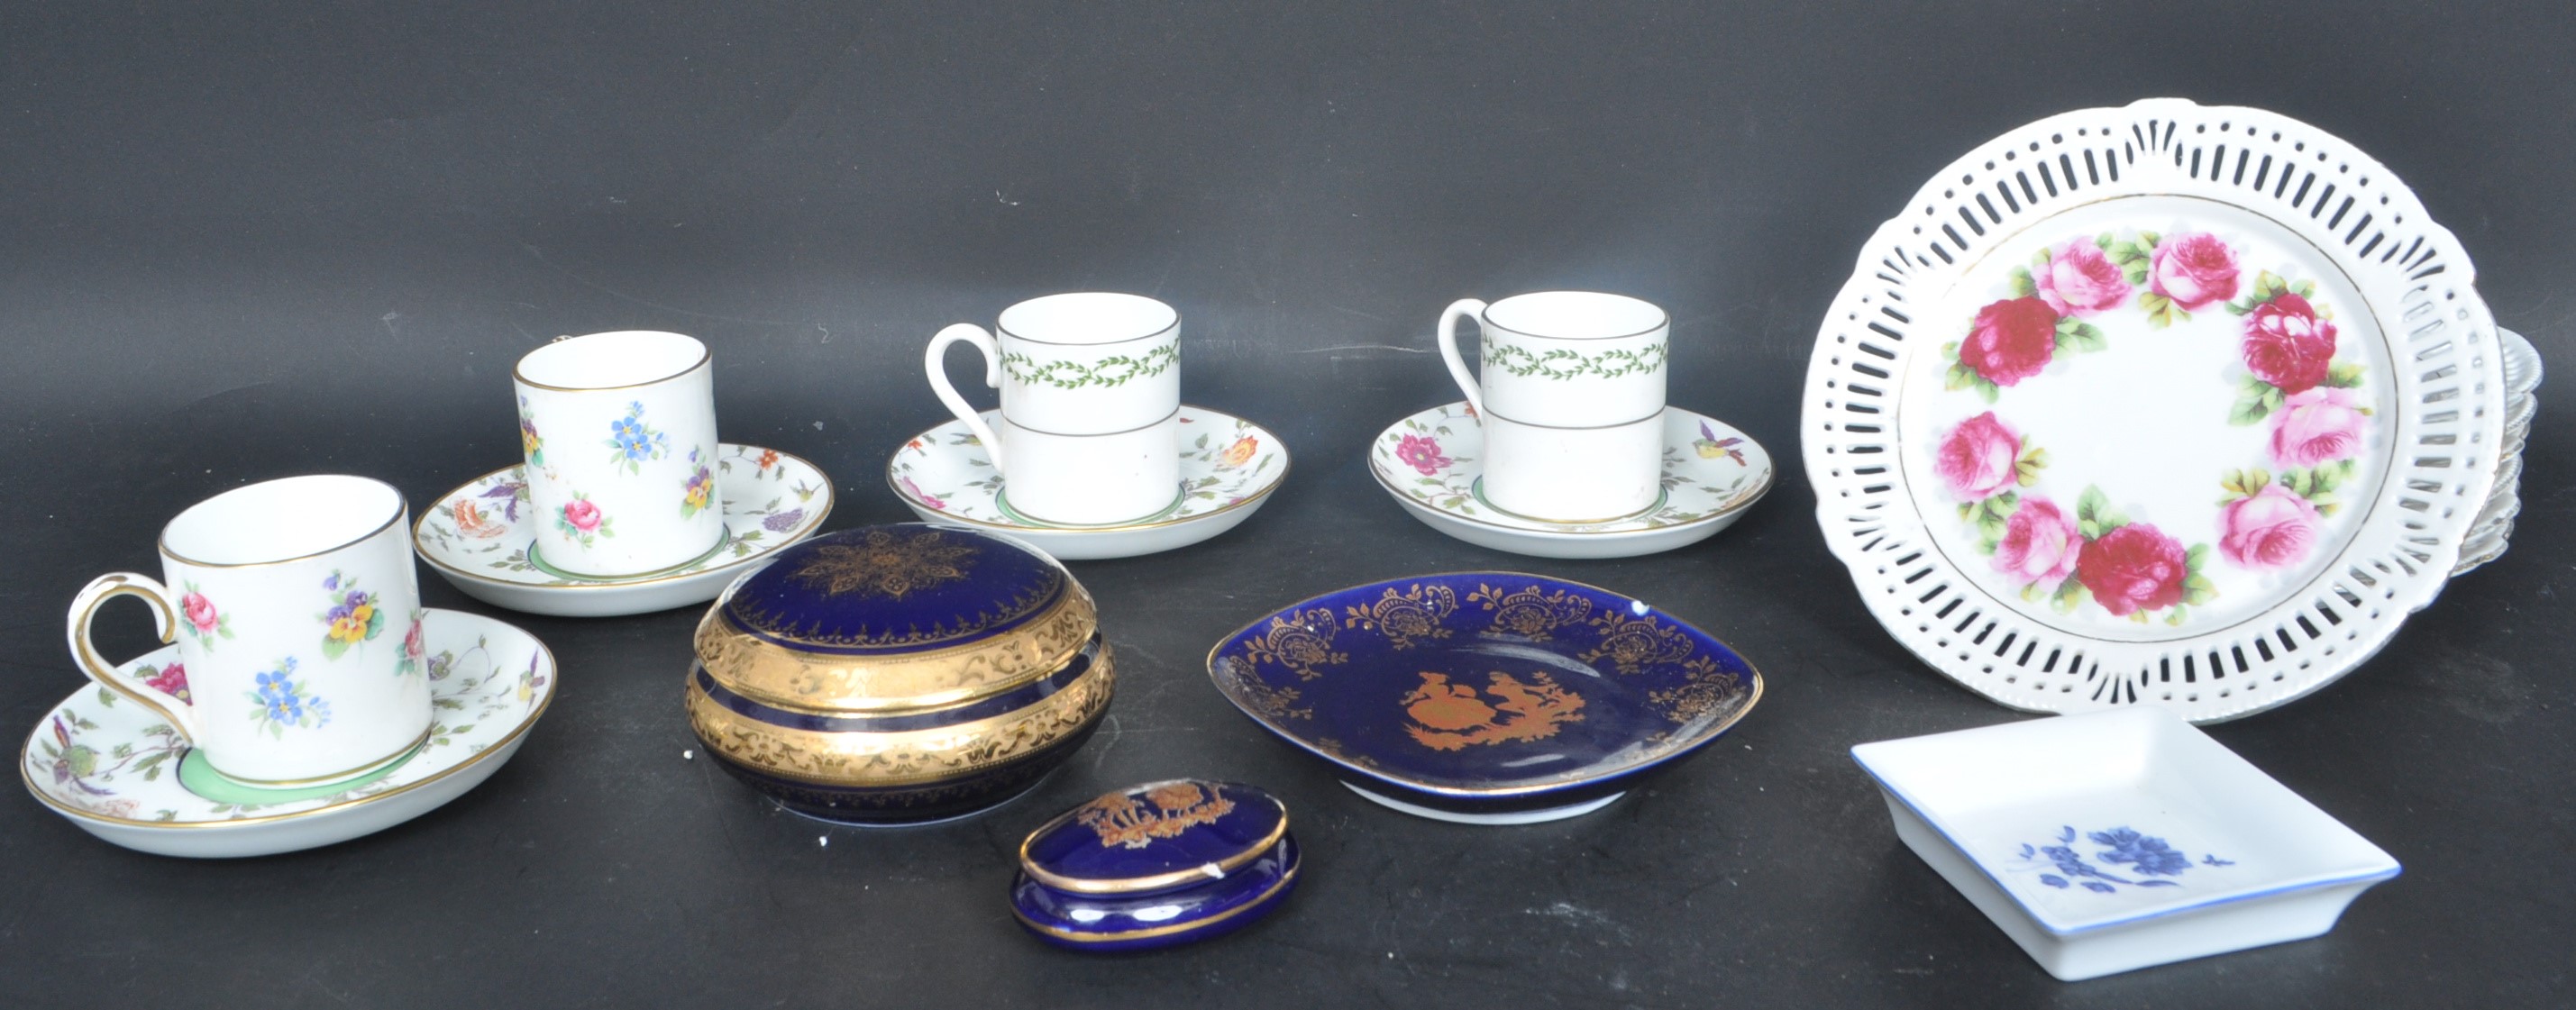 COLLECTION OF STAFFORDSHIRE - LIMOGES - CHANTILLY FINE CHINA